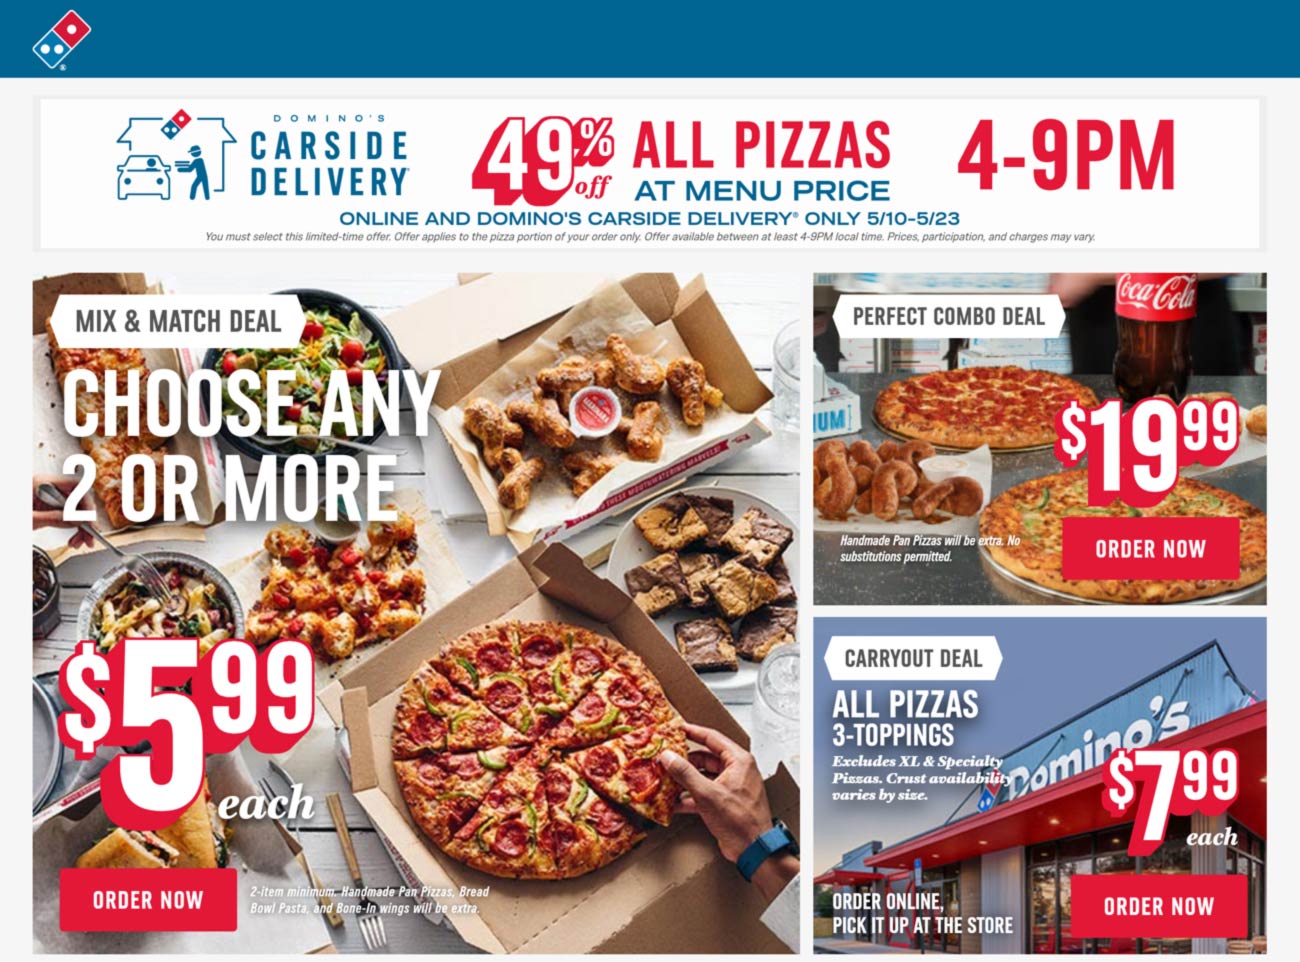 Dominos restaurants Coupon  49% off all carside pizzas 4-9p at Dominos pizza #dominos 